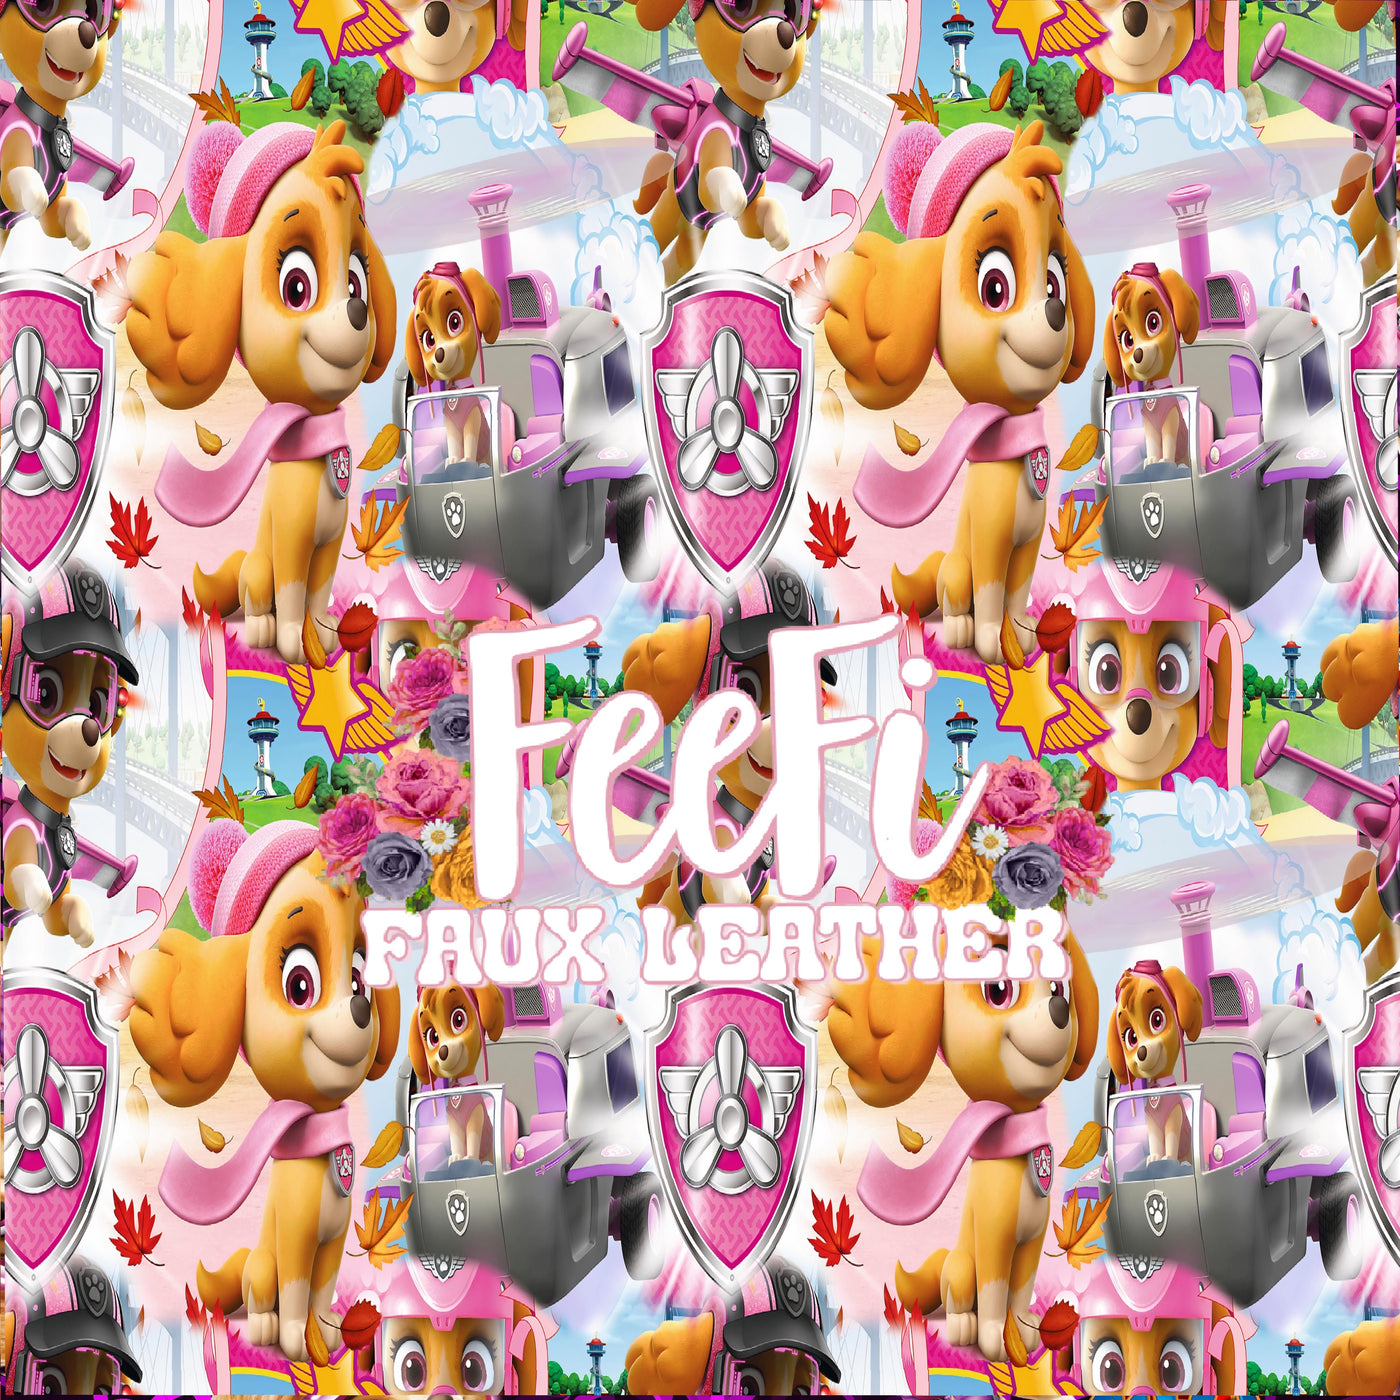 Paw Patrol Skye 1 Yard Printed 2 1/2 inch on Grosgrain Ribbon, Potter Ribbon, Character Ribbon, Cut to Size, View Store For More Patterns